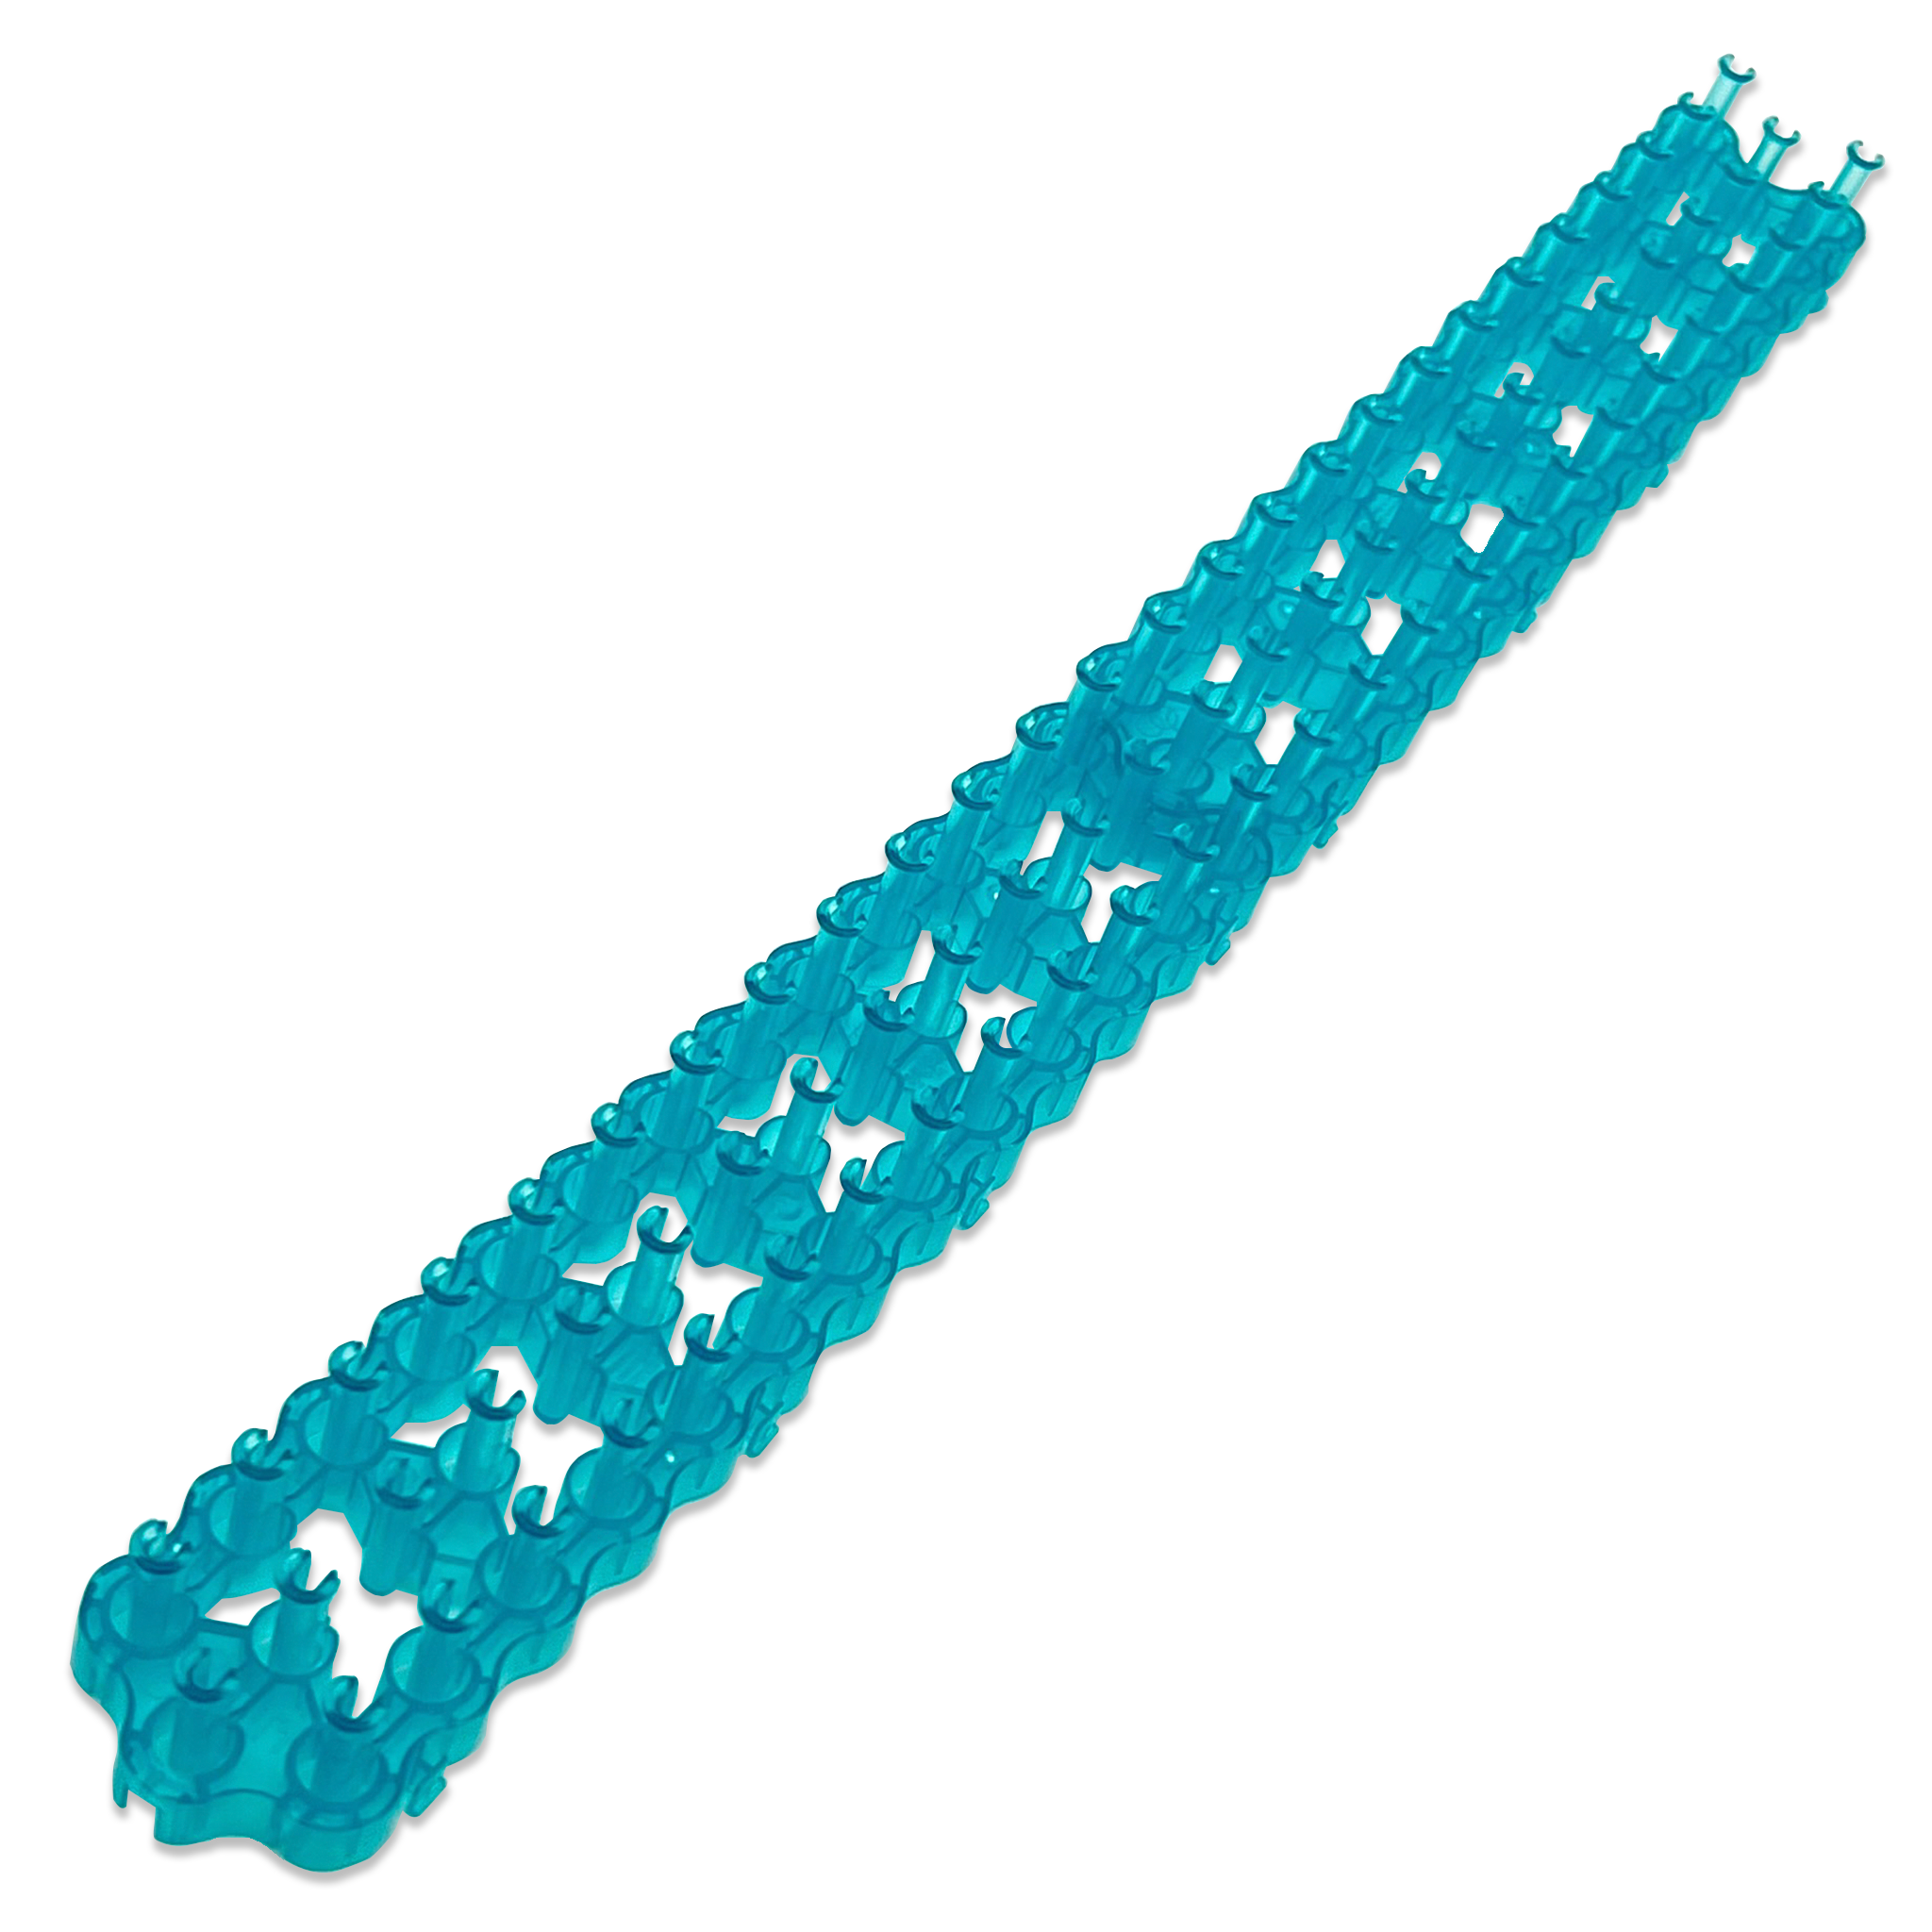 12 Pack: Rainbow Loom® Multicolor Refill Bands